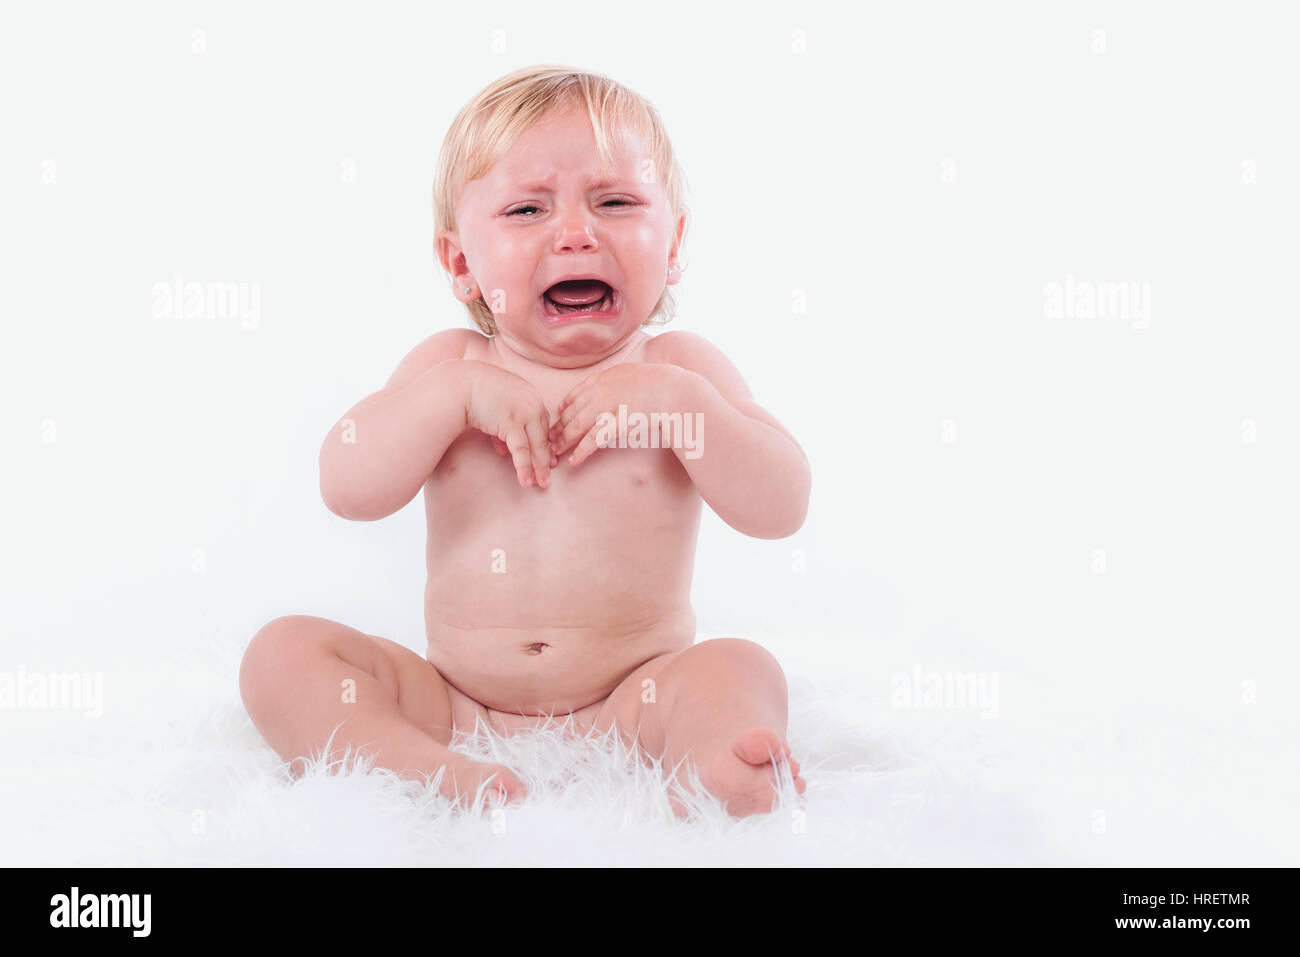 crying baby in diaper Stock Photo